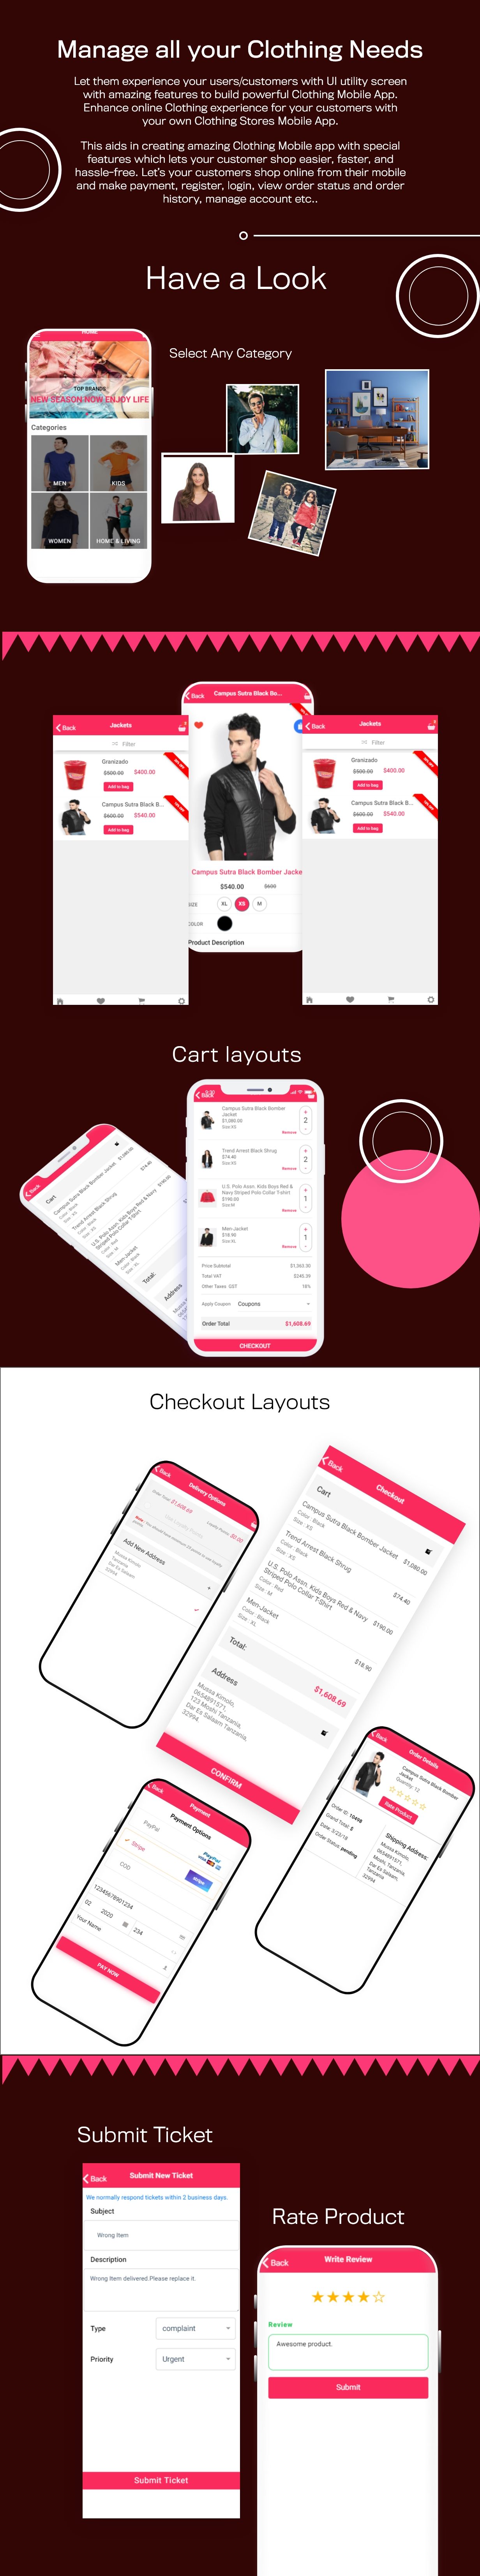 Clothing - Complete Ionic app for e-commerce shop - 5